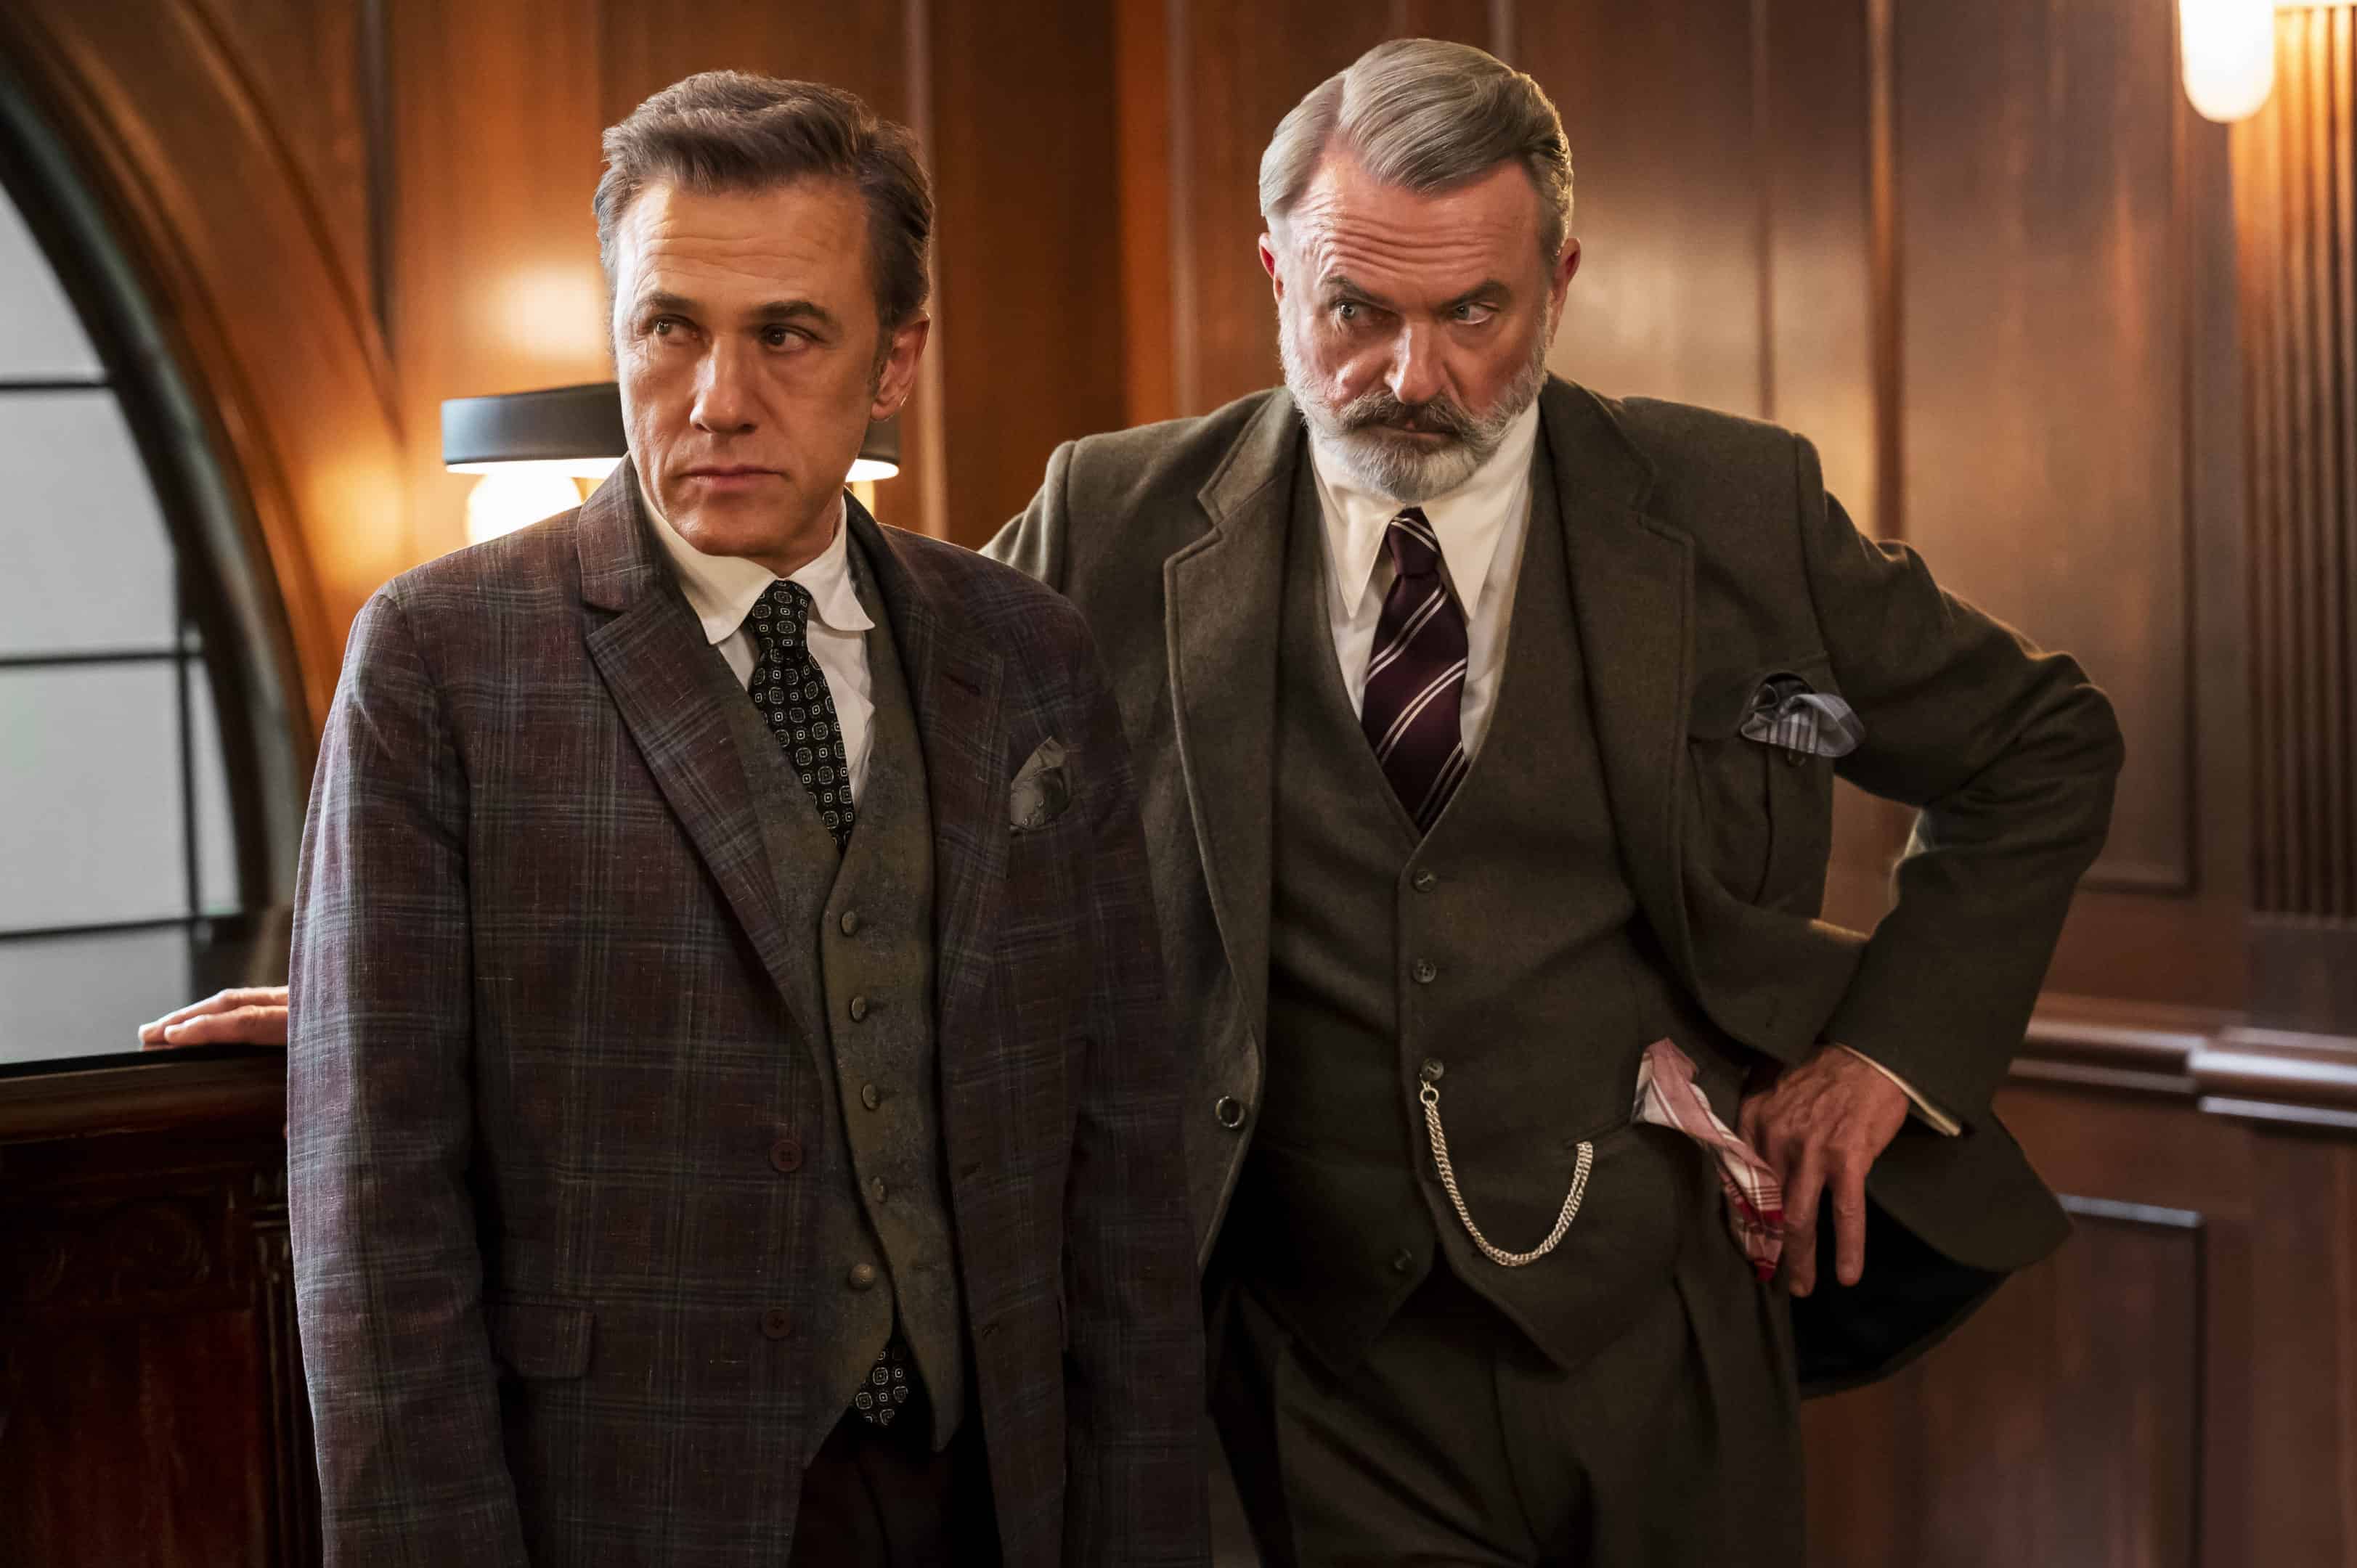 The Portable Door: MGM+ Original Comedy Starring Christoph Waltz and Sam Neill to Debut in the US on April 8th, 2023 2